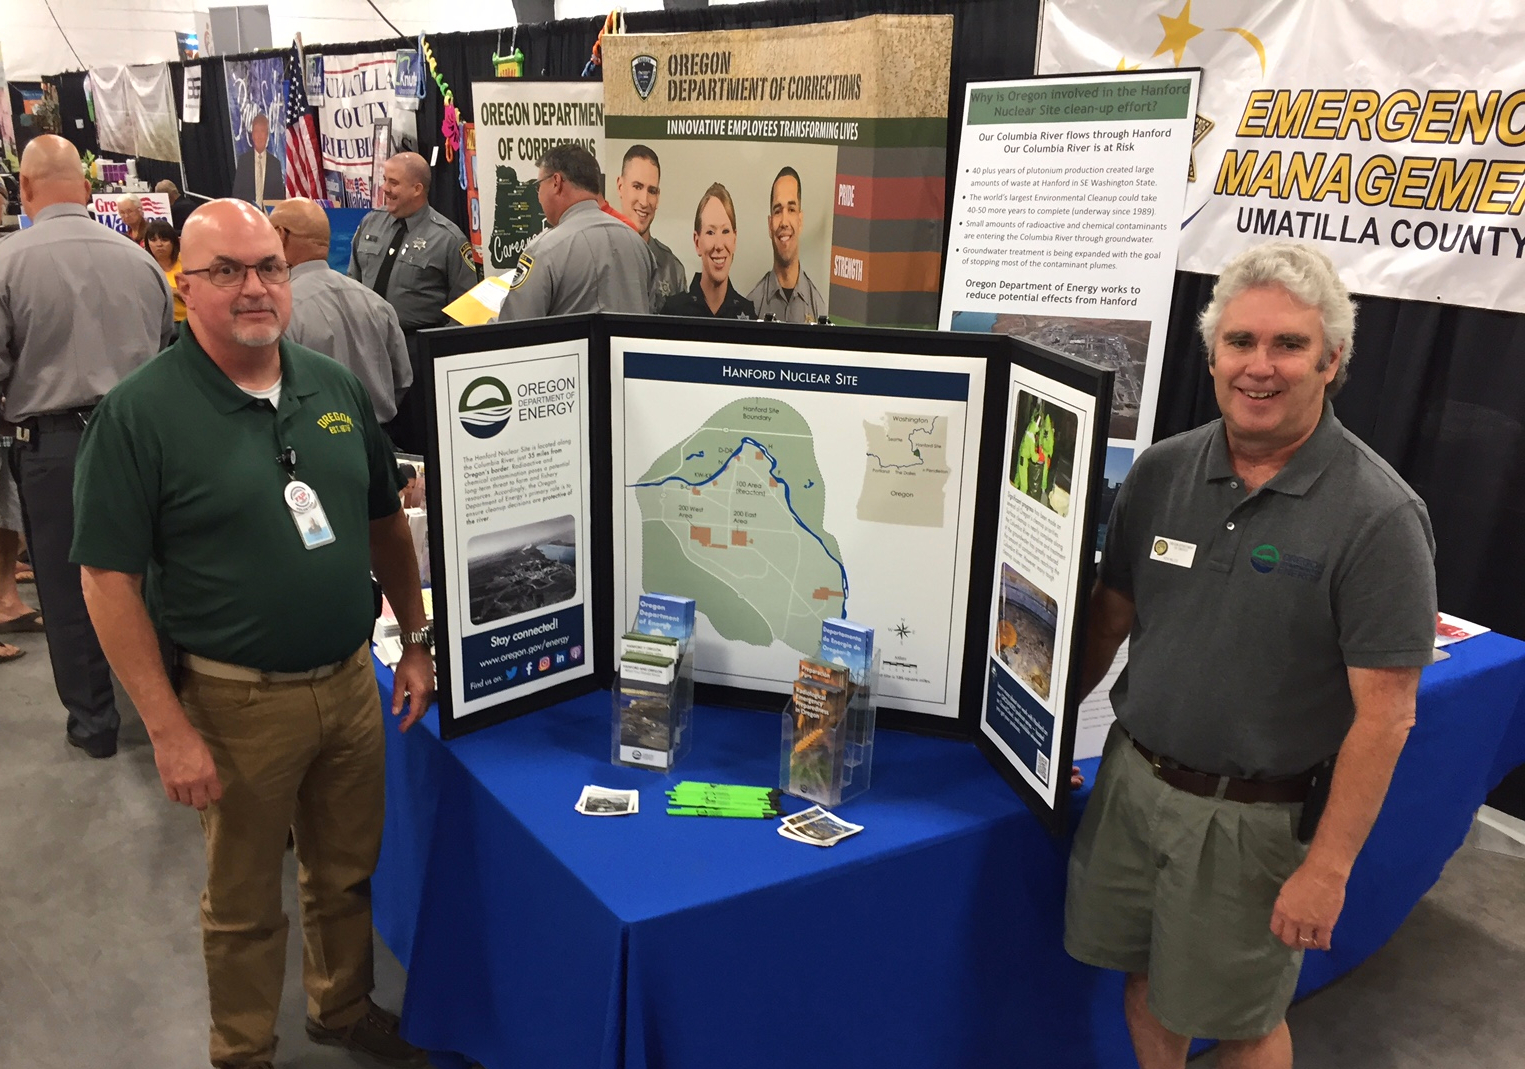  Our Mark Reese (left) and Ken Niles fielded and array questions at the Umatilla County Fair in  Hermiston .     